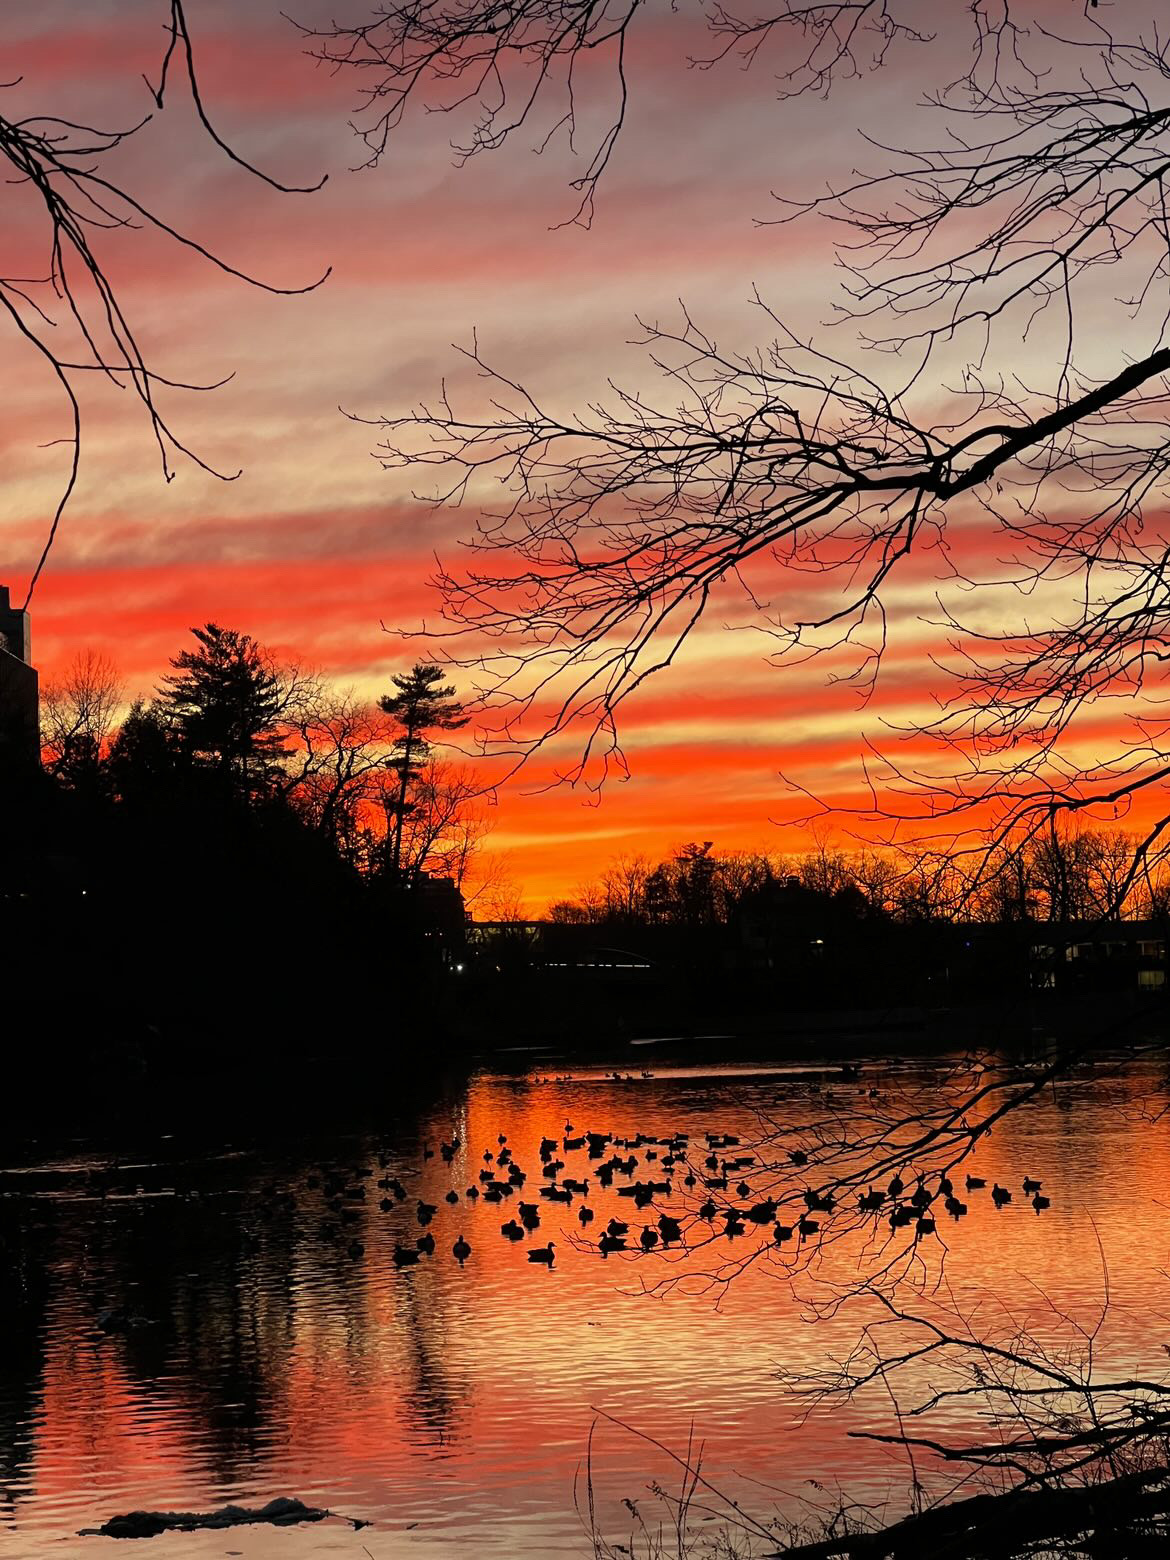 Ducks swimming in Beebe Lake at Cornell University under a bright red and orange sunset.